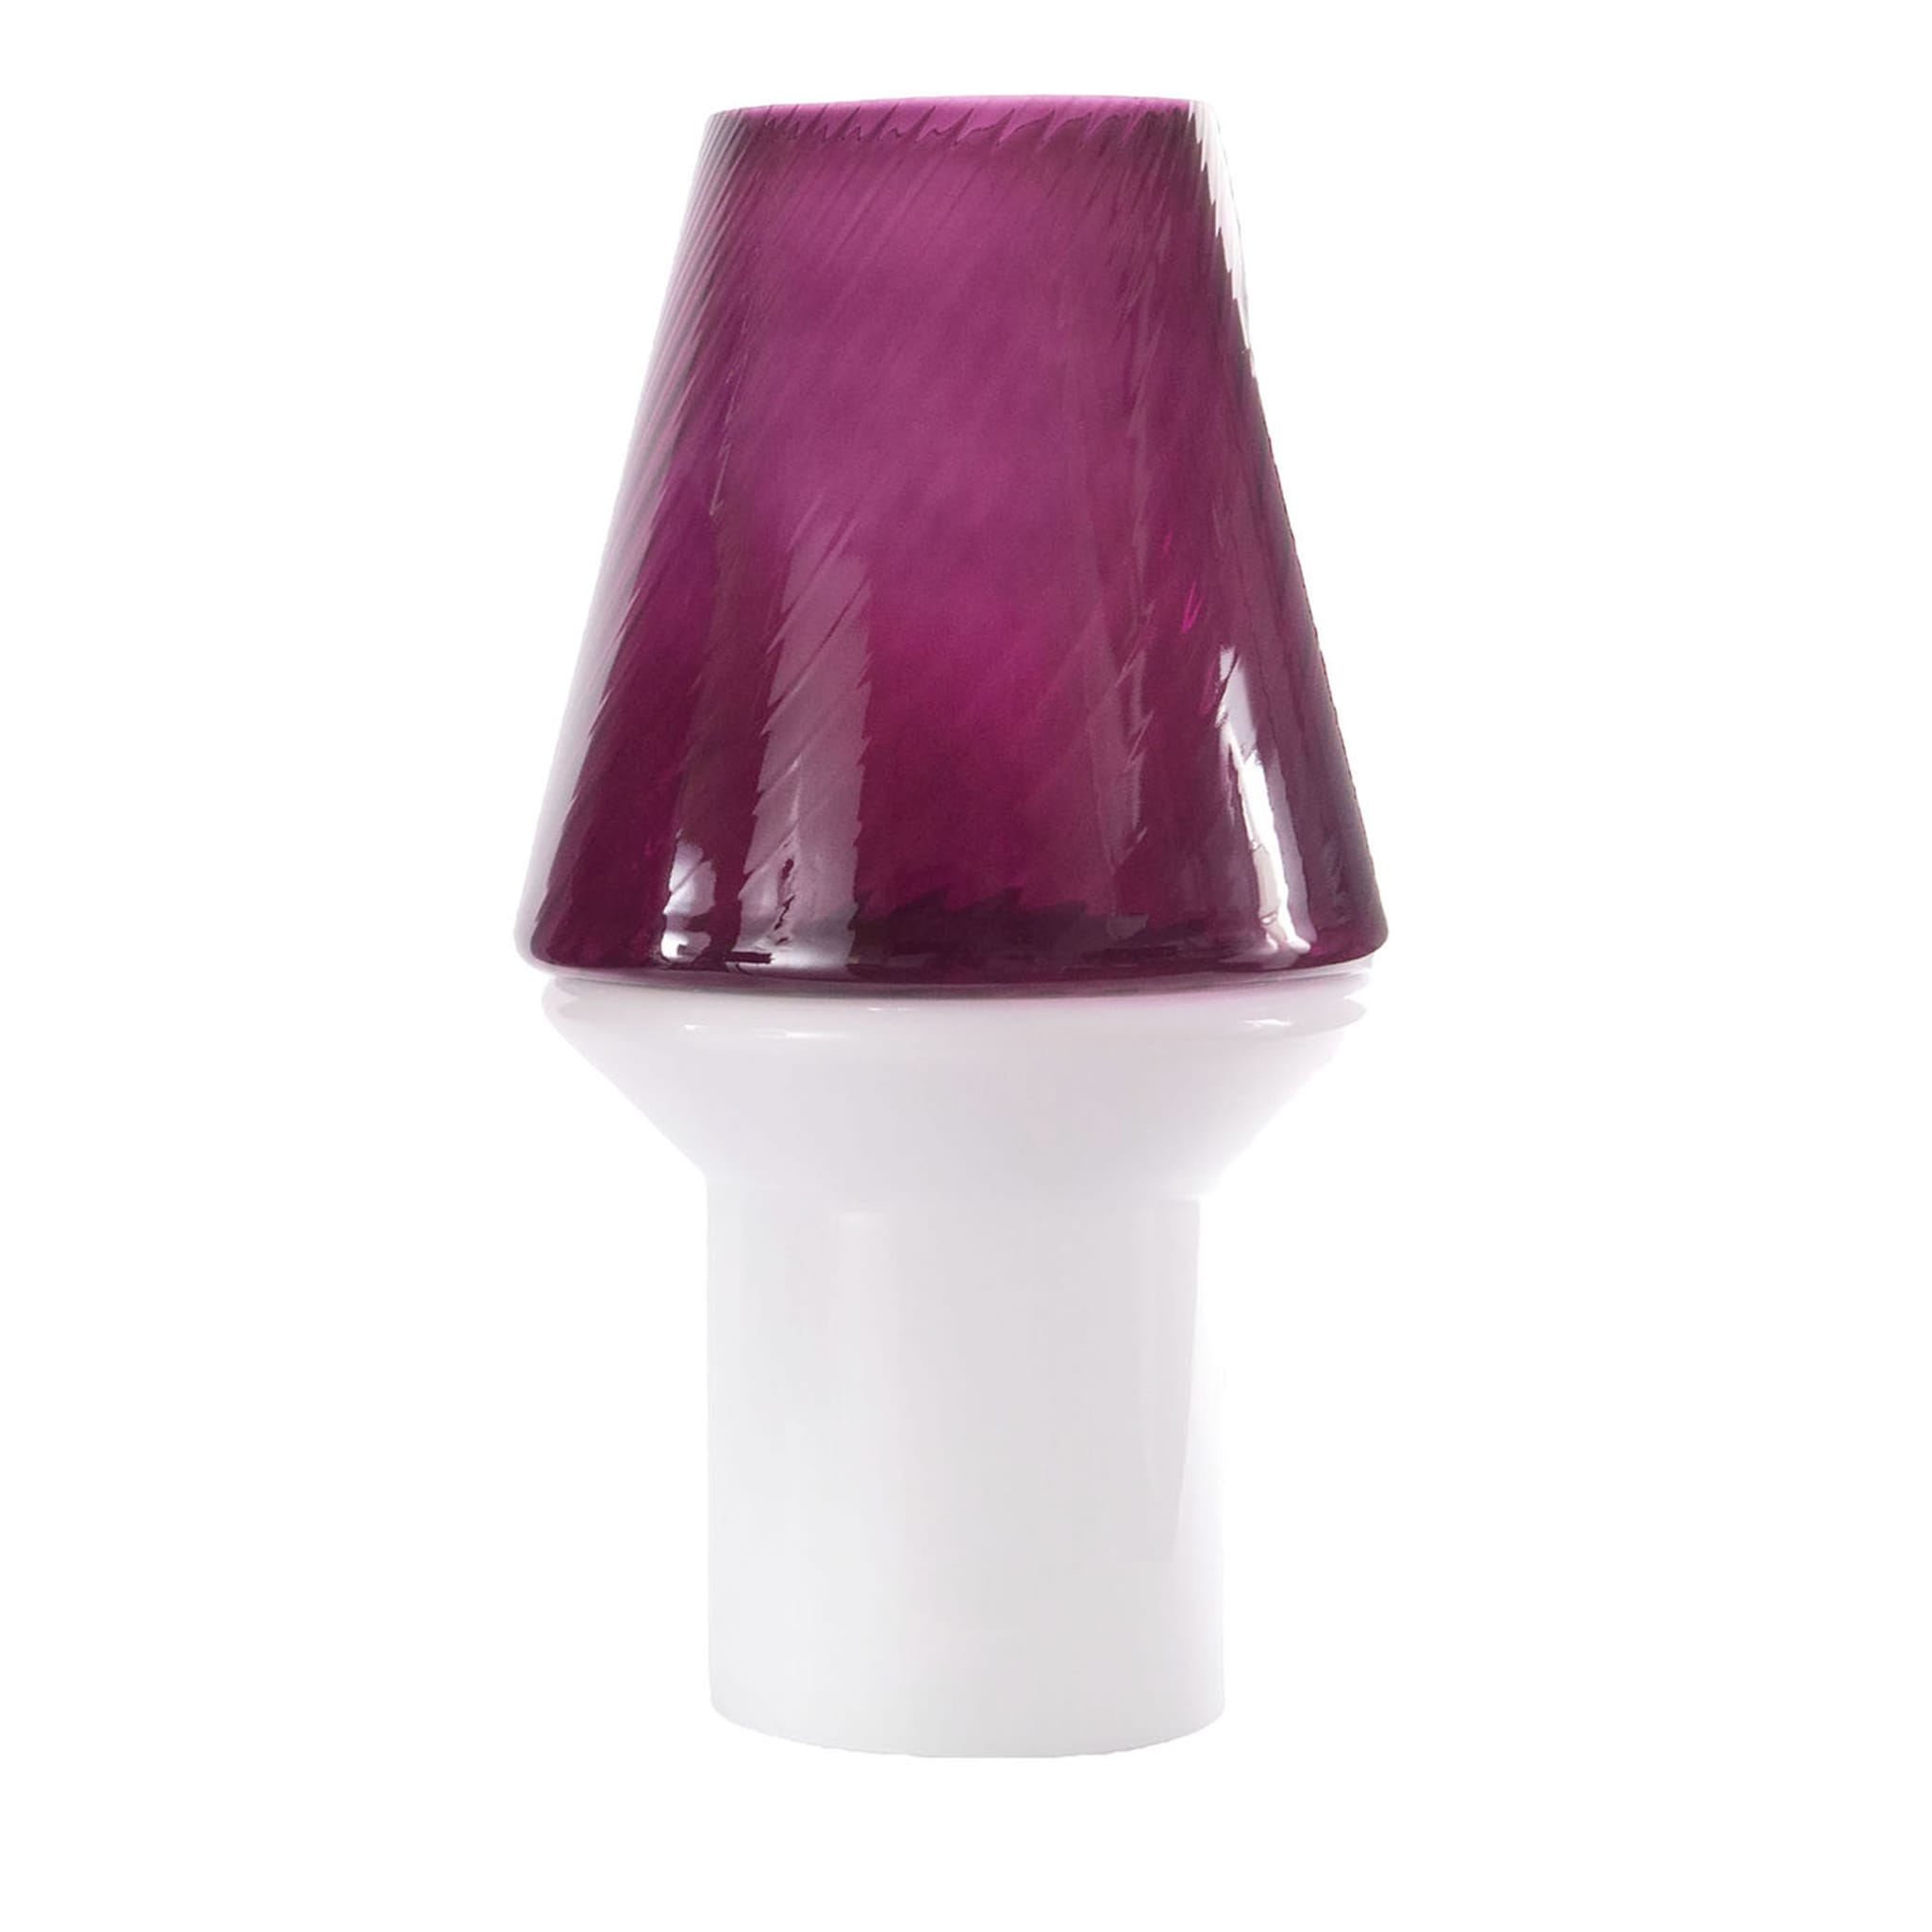 Forest Purple Table Lamp by Romani Saccani #1 - Main view